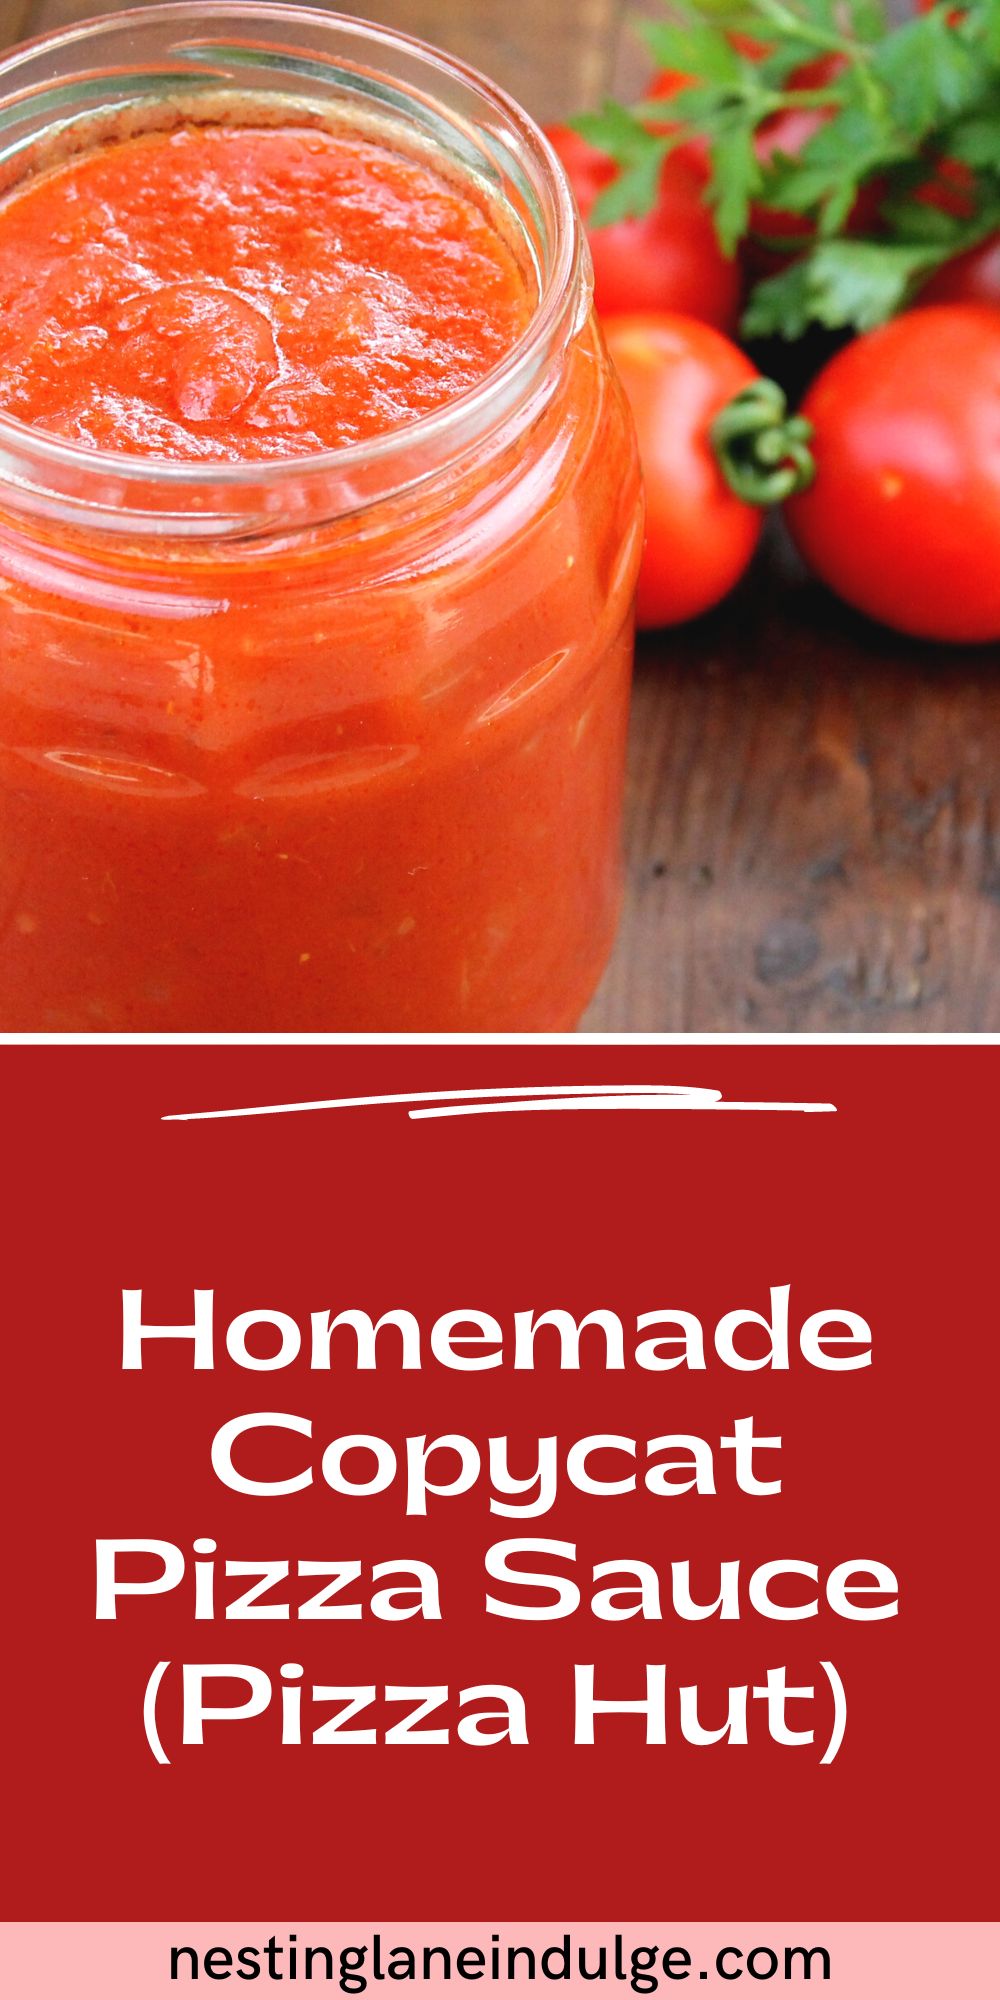 Graphic for Pinterest of Homemade Copycat Pizza Sauce (Pizza Hut) Recipe.